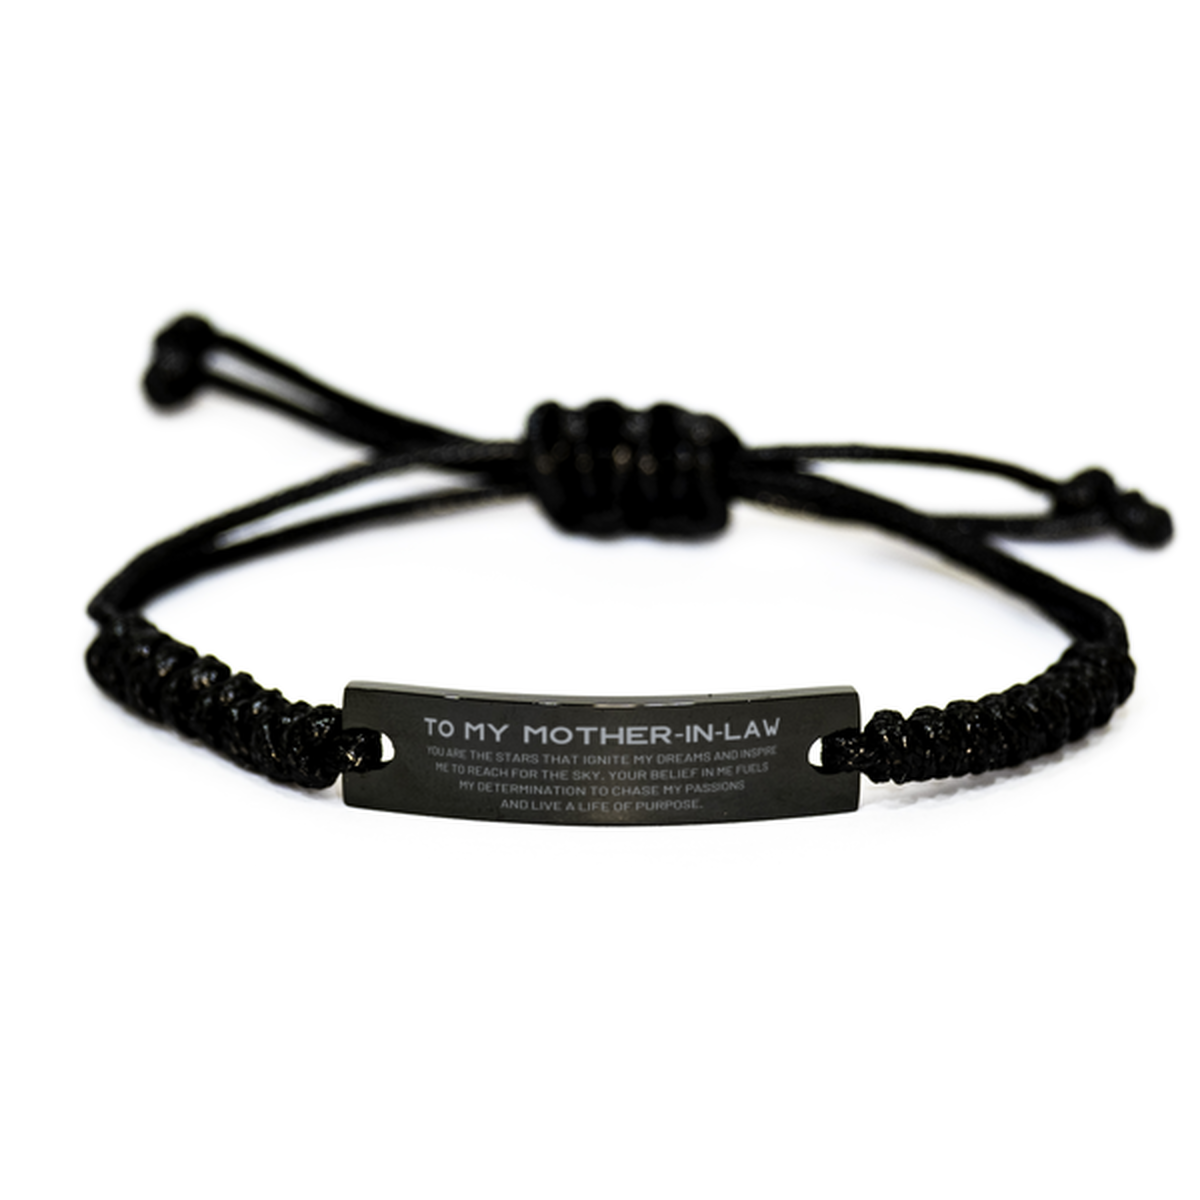 To My Mother-In-Law Black Rope Bracelet, You are the stars that ignite my dreams and inspire me to reach for the sky, Birthday Unique Gifts For Mother-In-Law, Thank You Gifts For Mother-In-Law